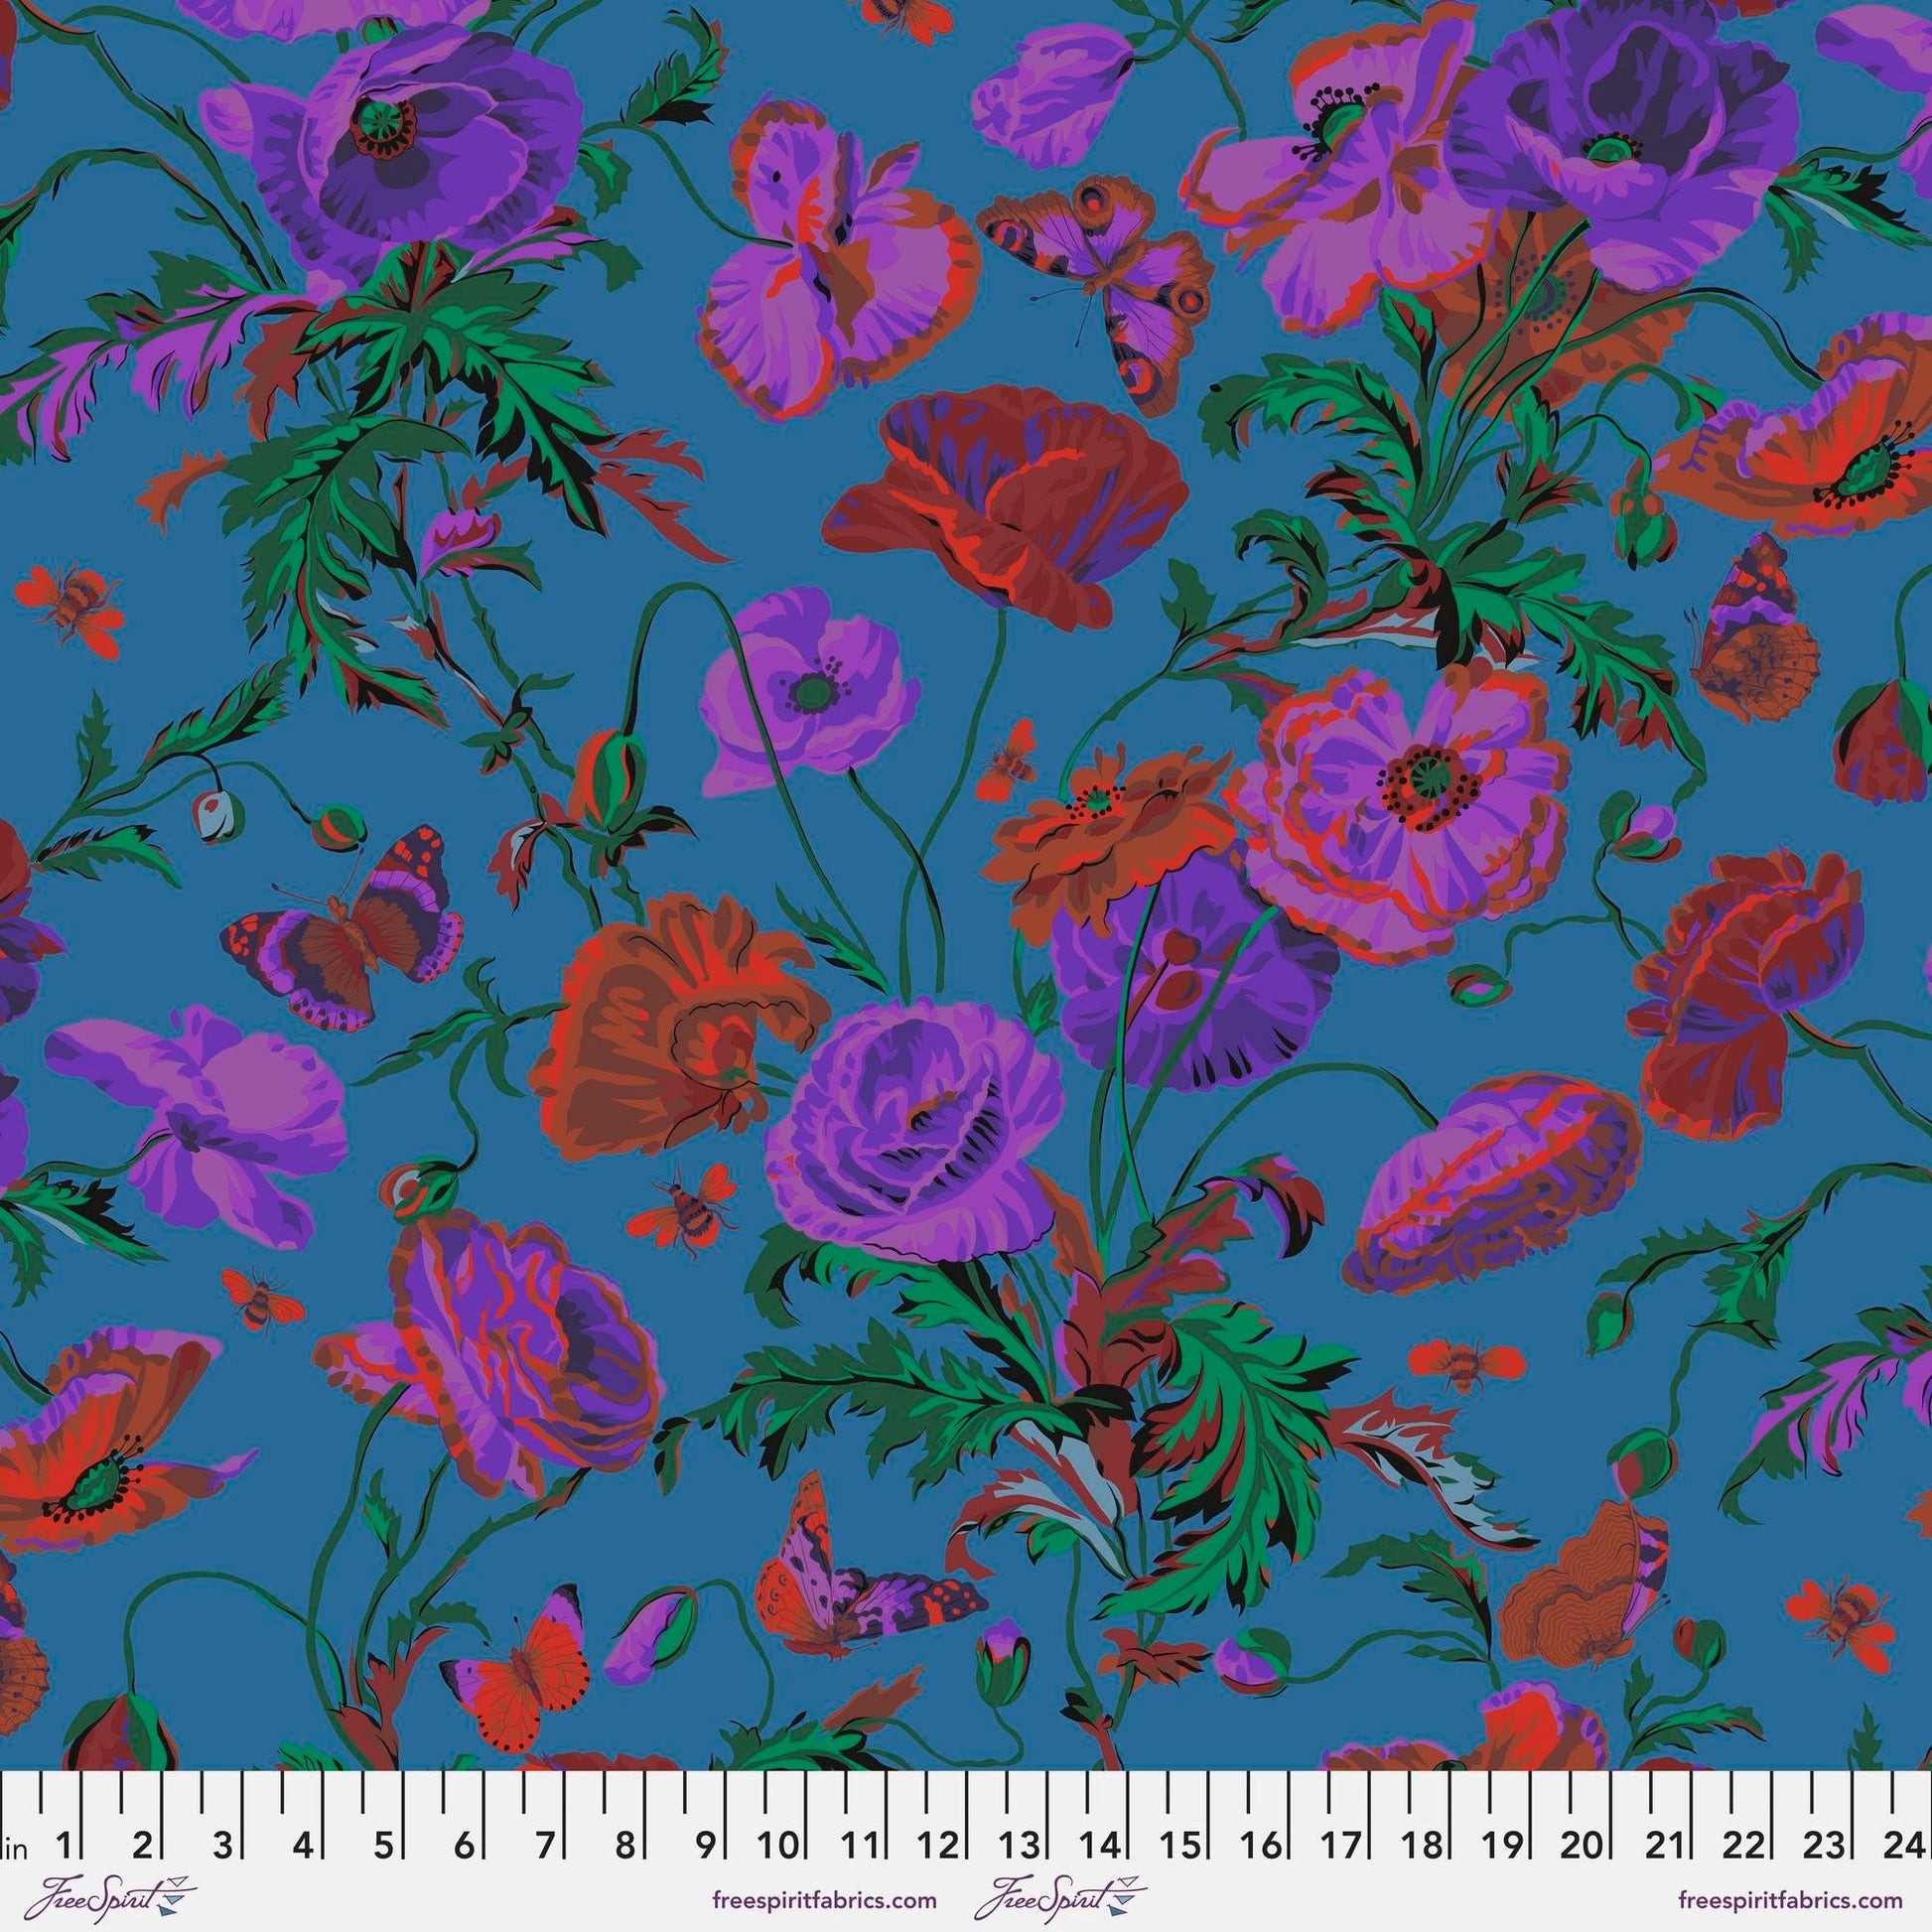 Meadow Teal August 2022 Philip Jacobs Kaffe Fassett Collective 100% Quilters Cotton Fabric Fetish